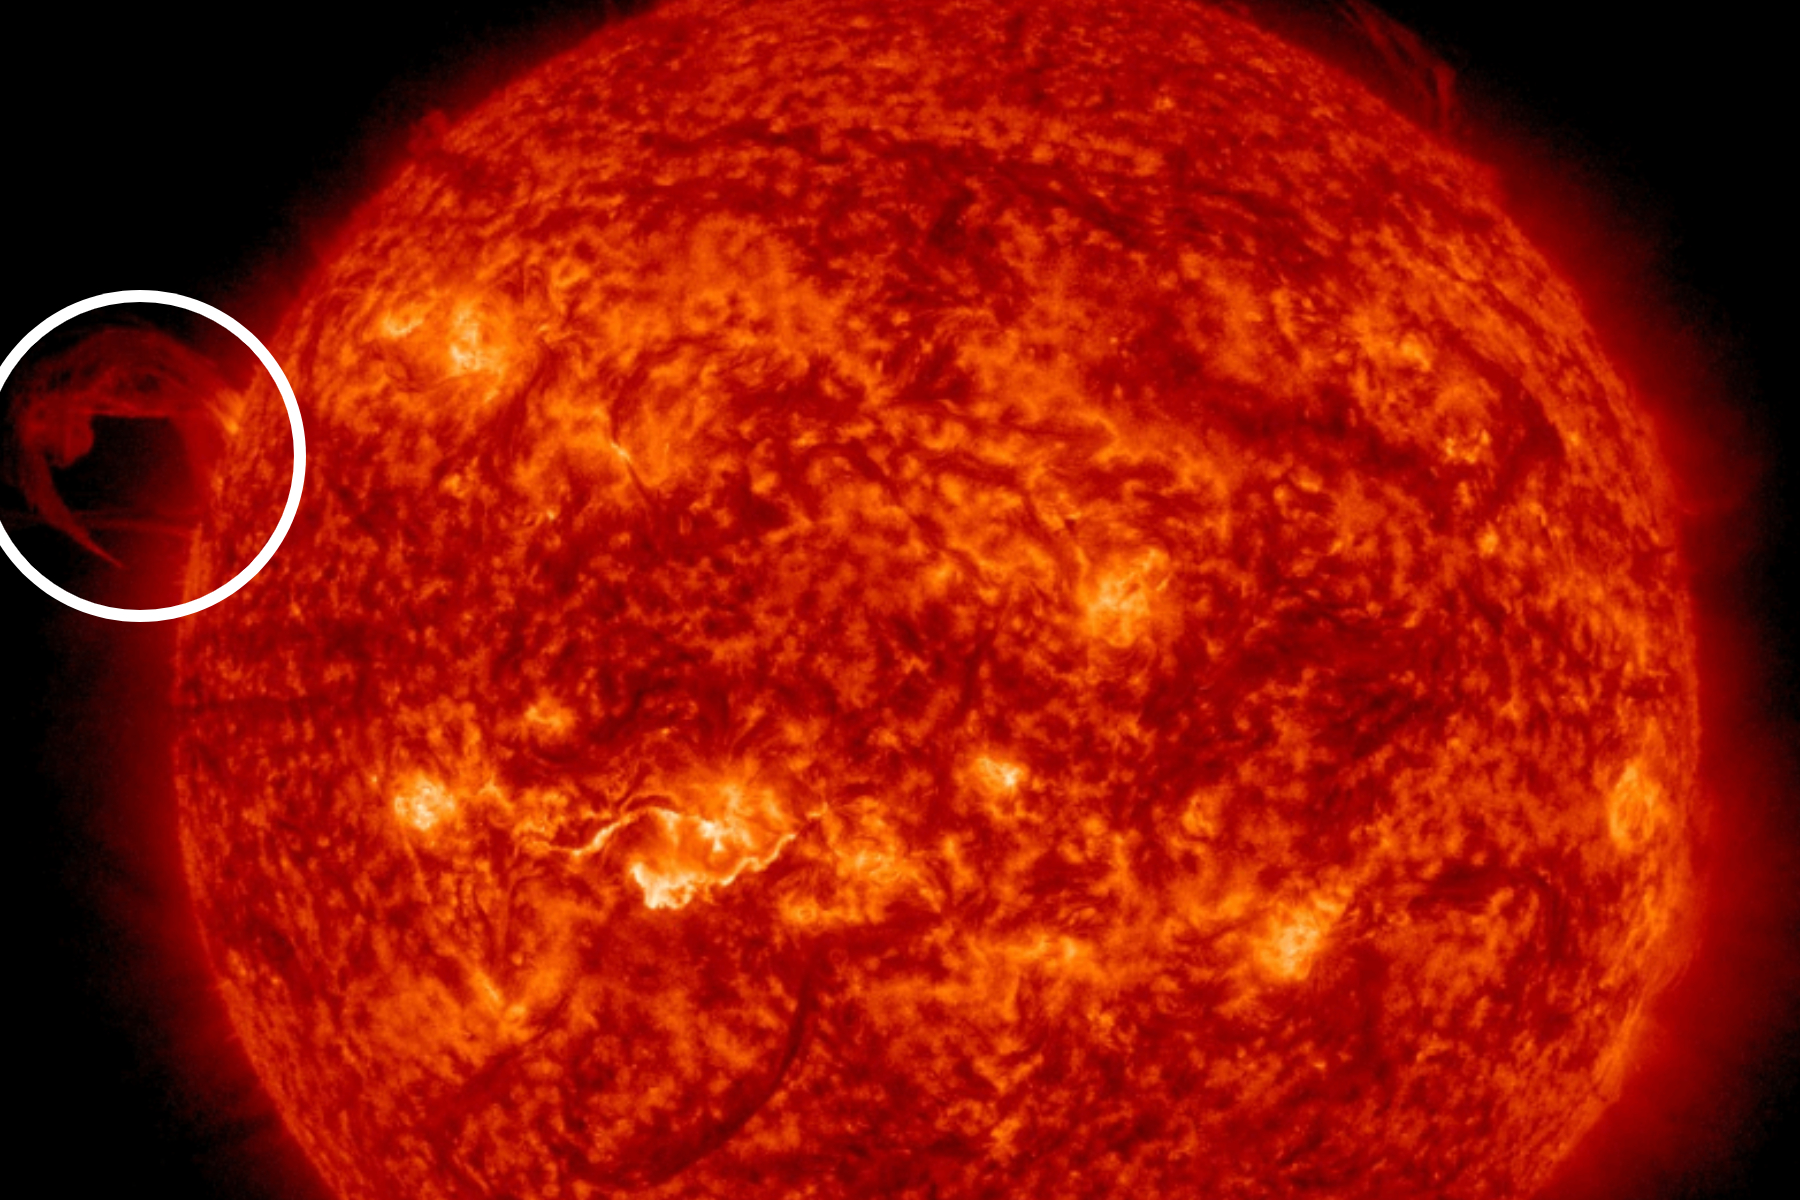 Strongest solar flare from Sun to hit Earth today, geomagnetic storms  likely - India Today